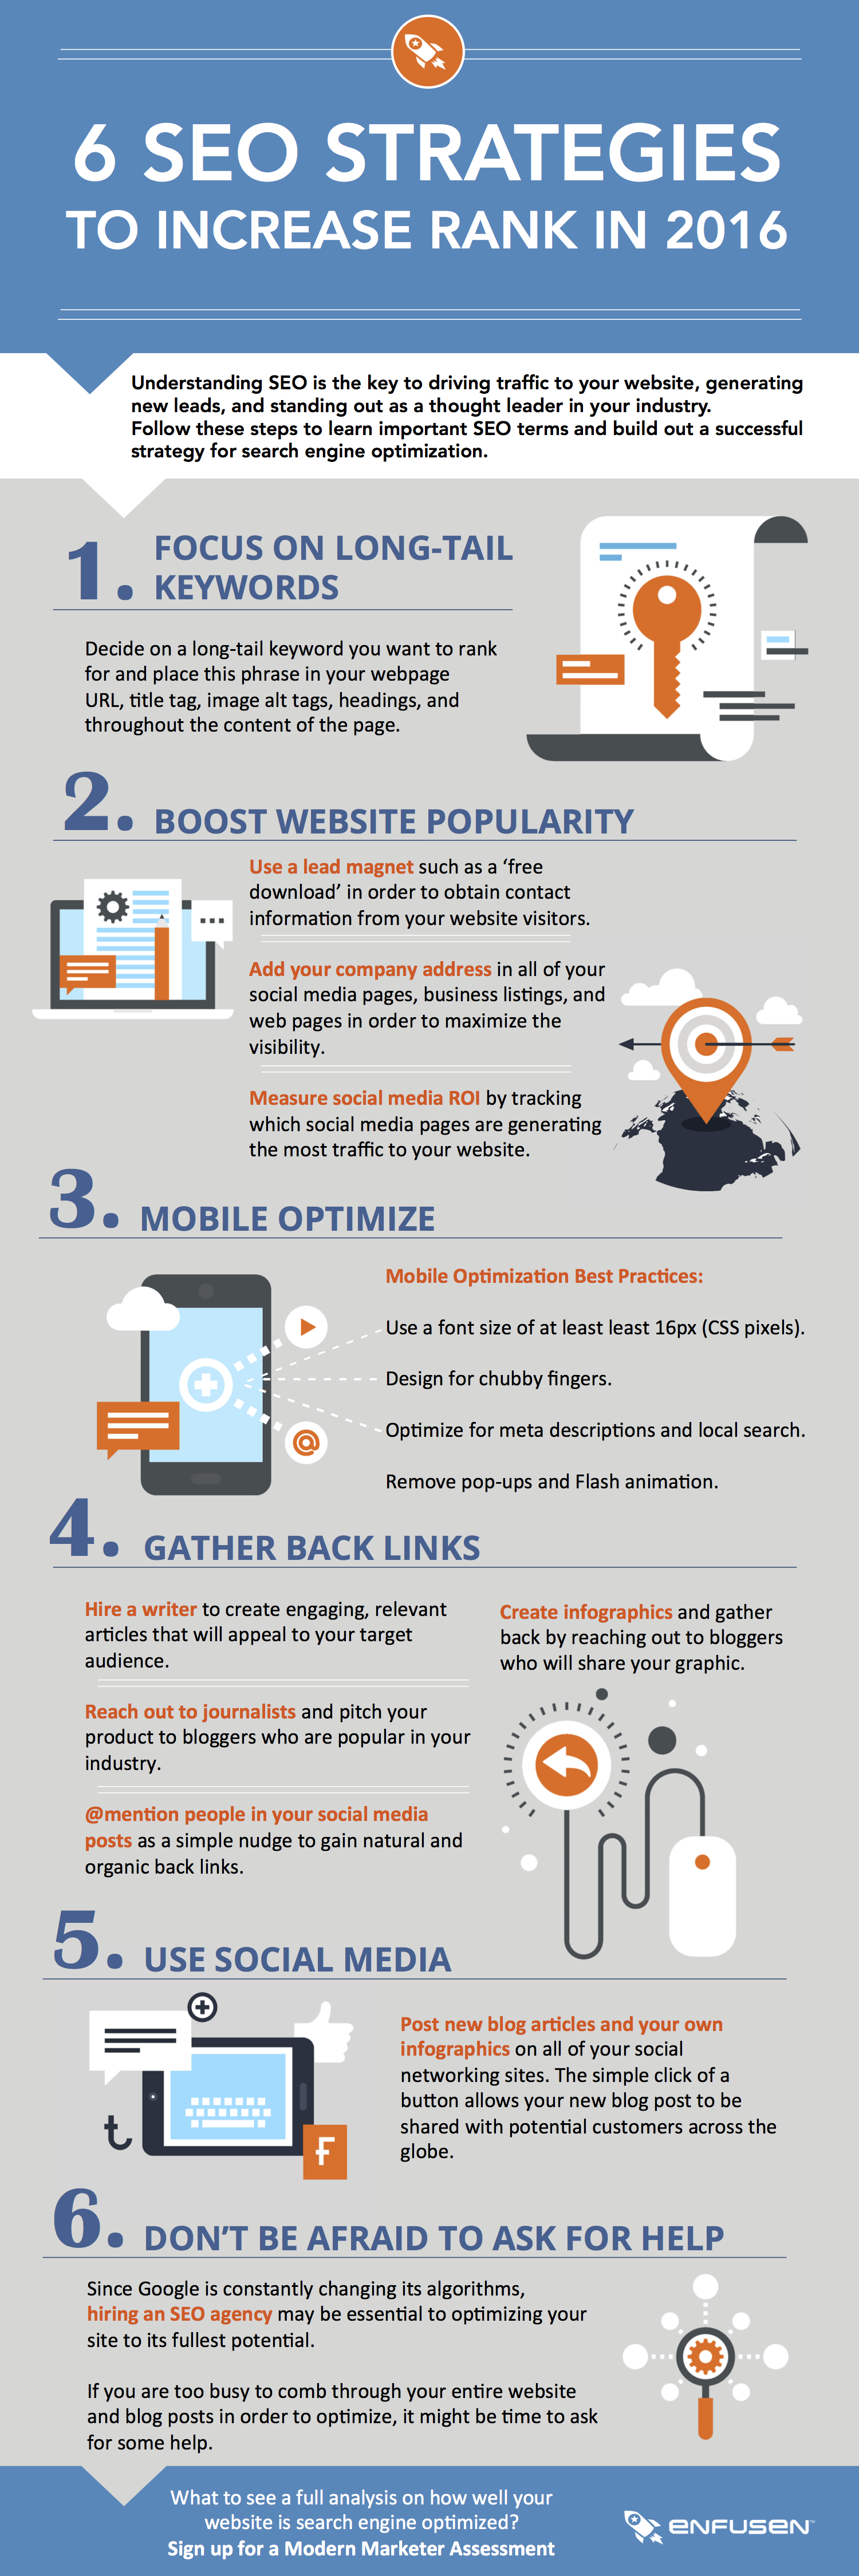 SEO Strategies to Increase Rank in 2016 Infographic